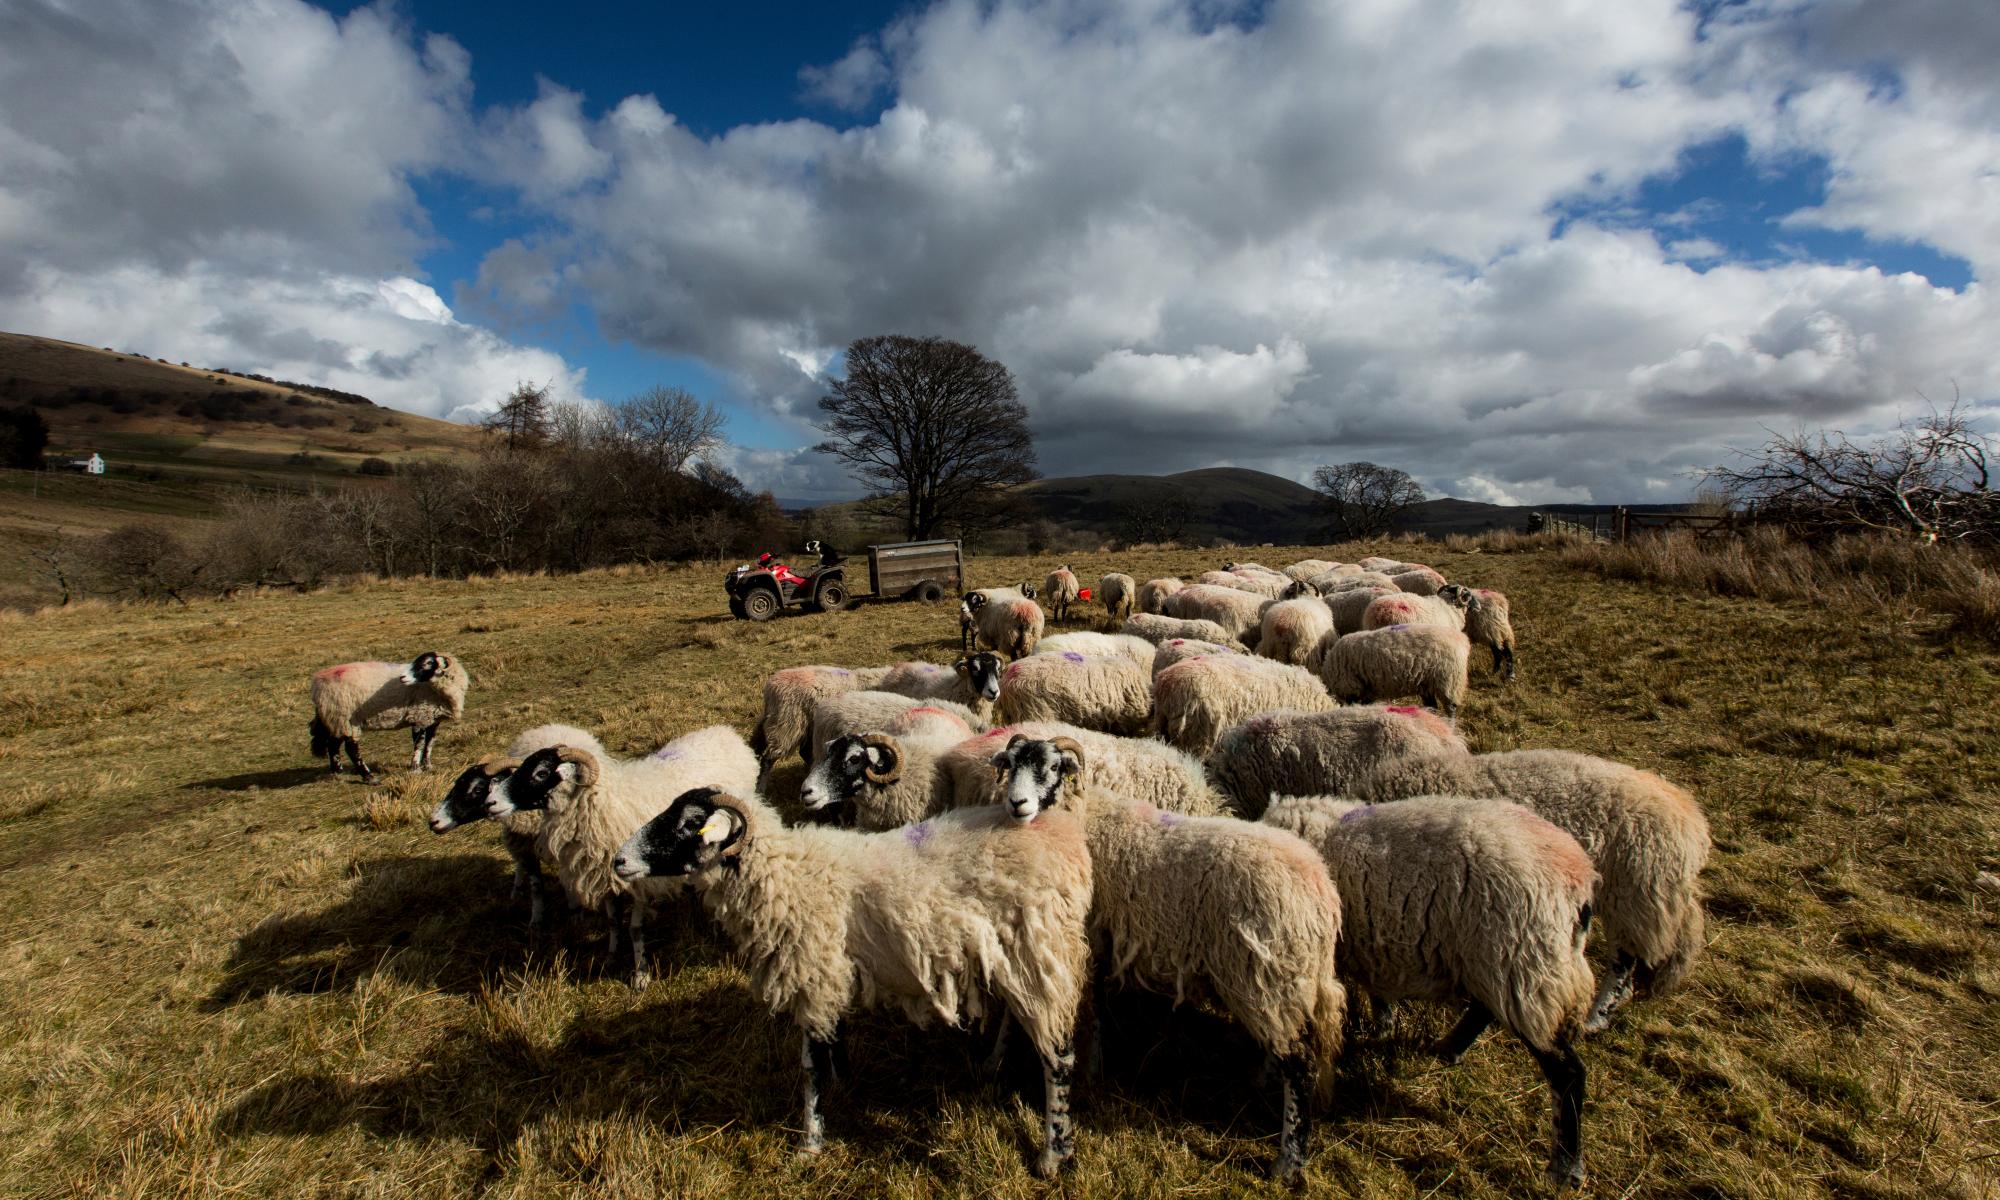 defra officials buried analysis showing dire financial prospects for hill farmers